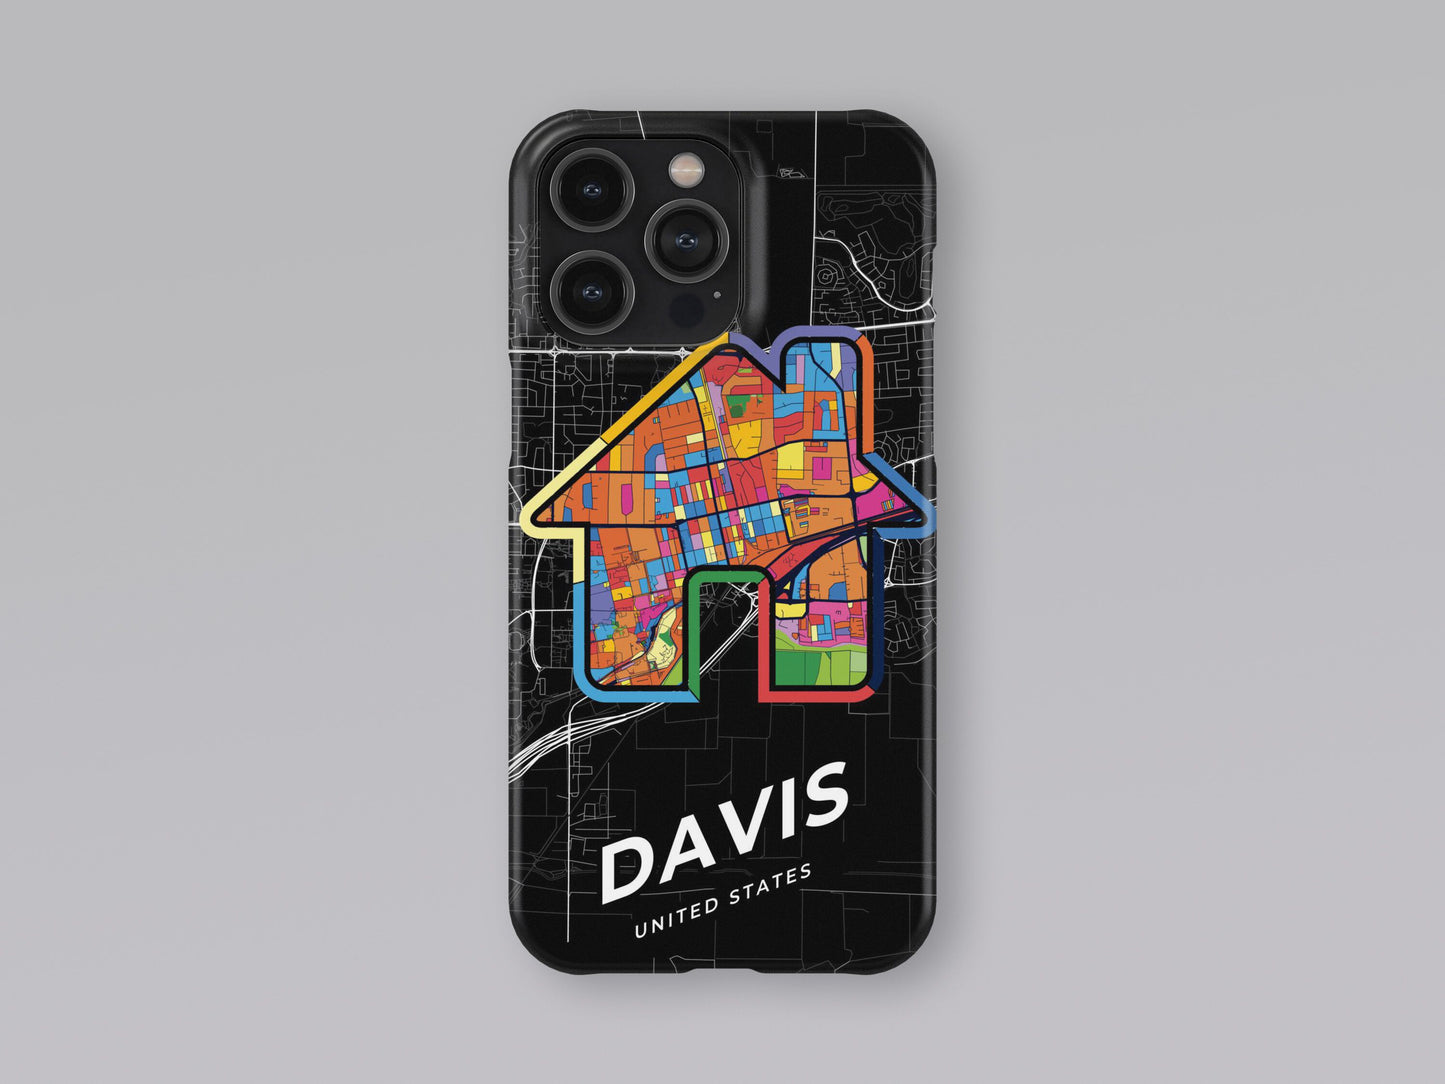 Davis California slim phone case with colorful icon. Birthday, wedding or housewarming gift. Couple match cases. 3